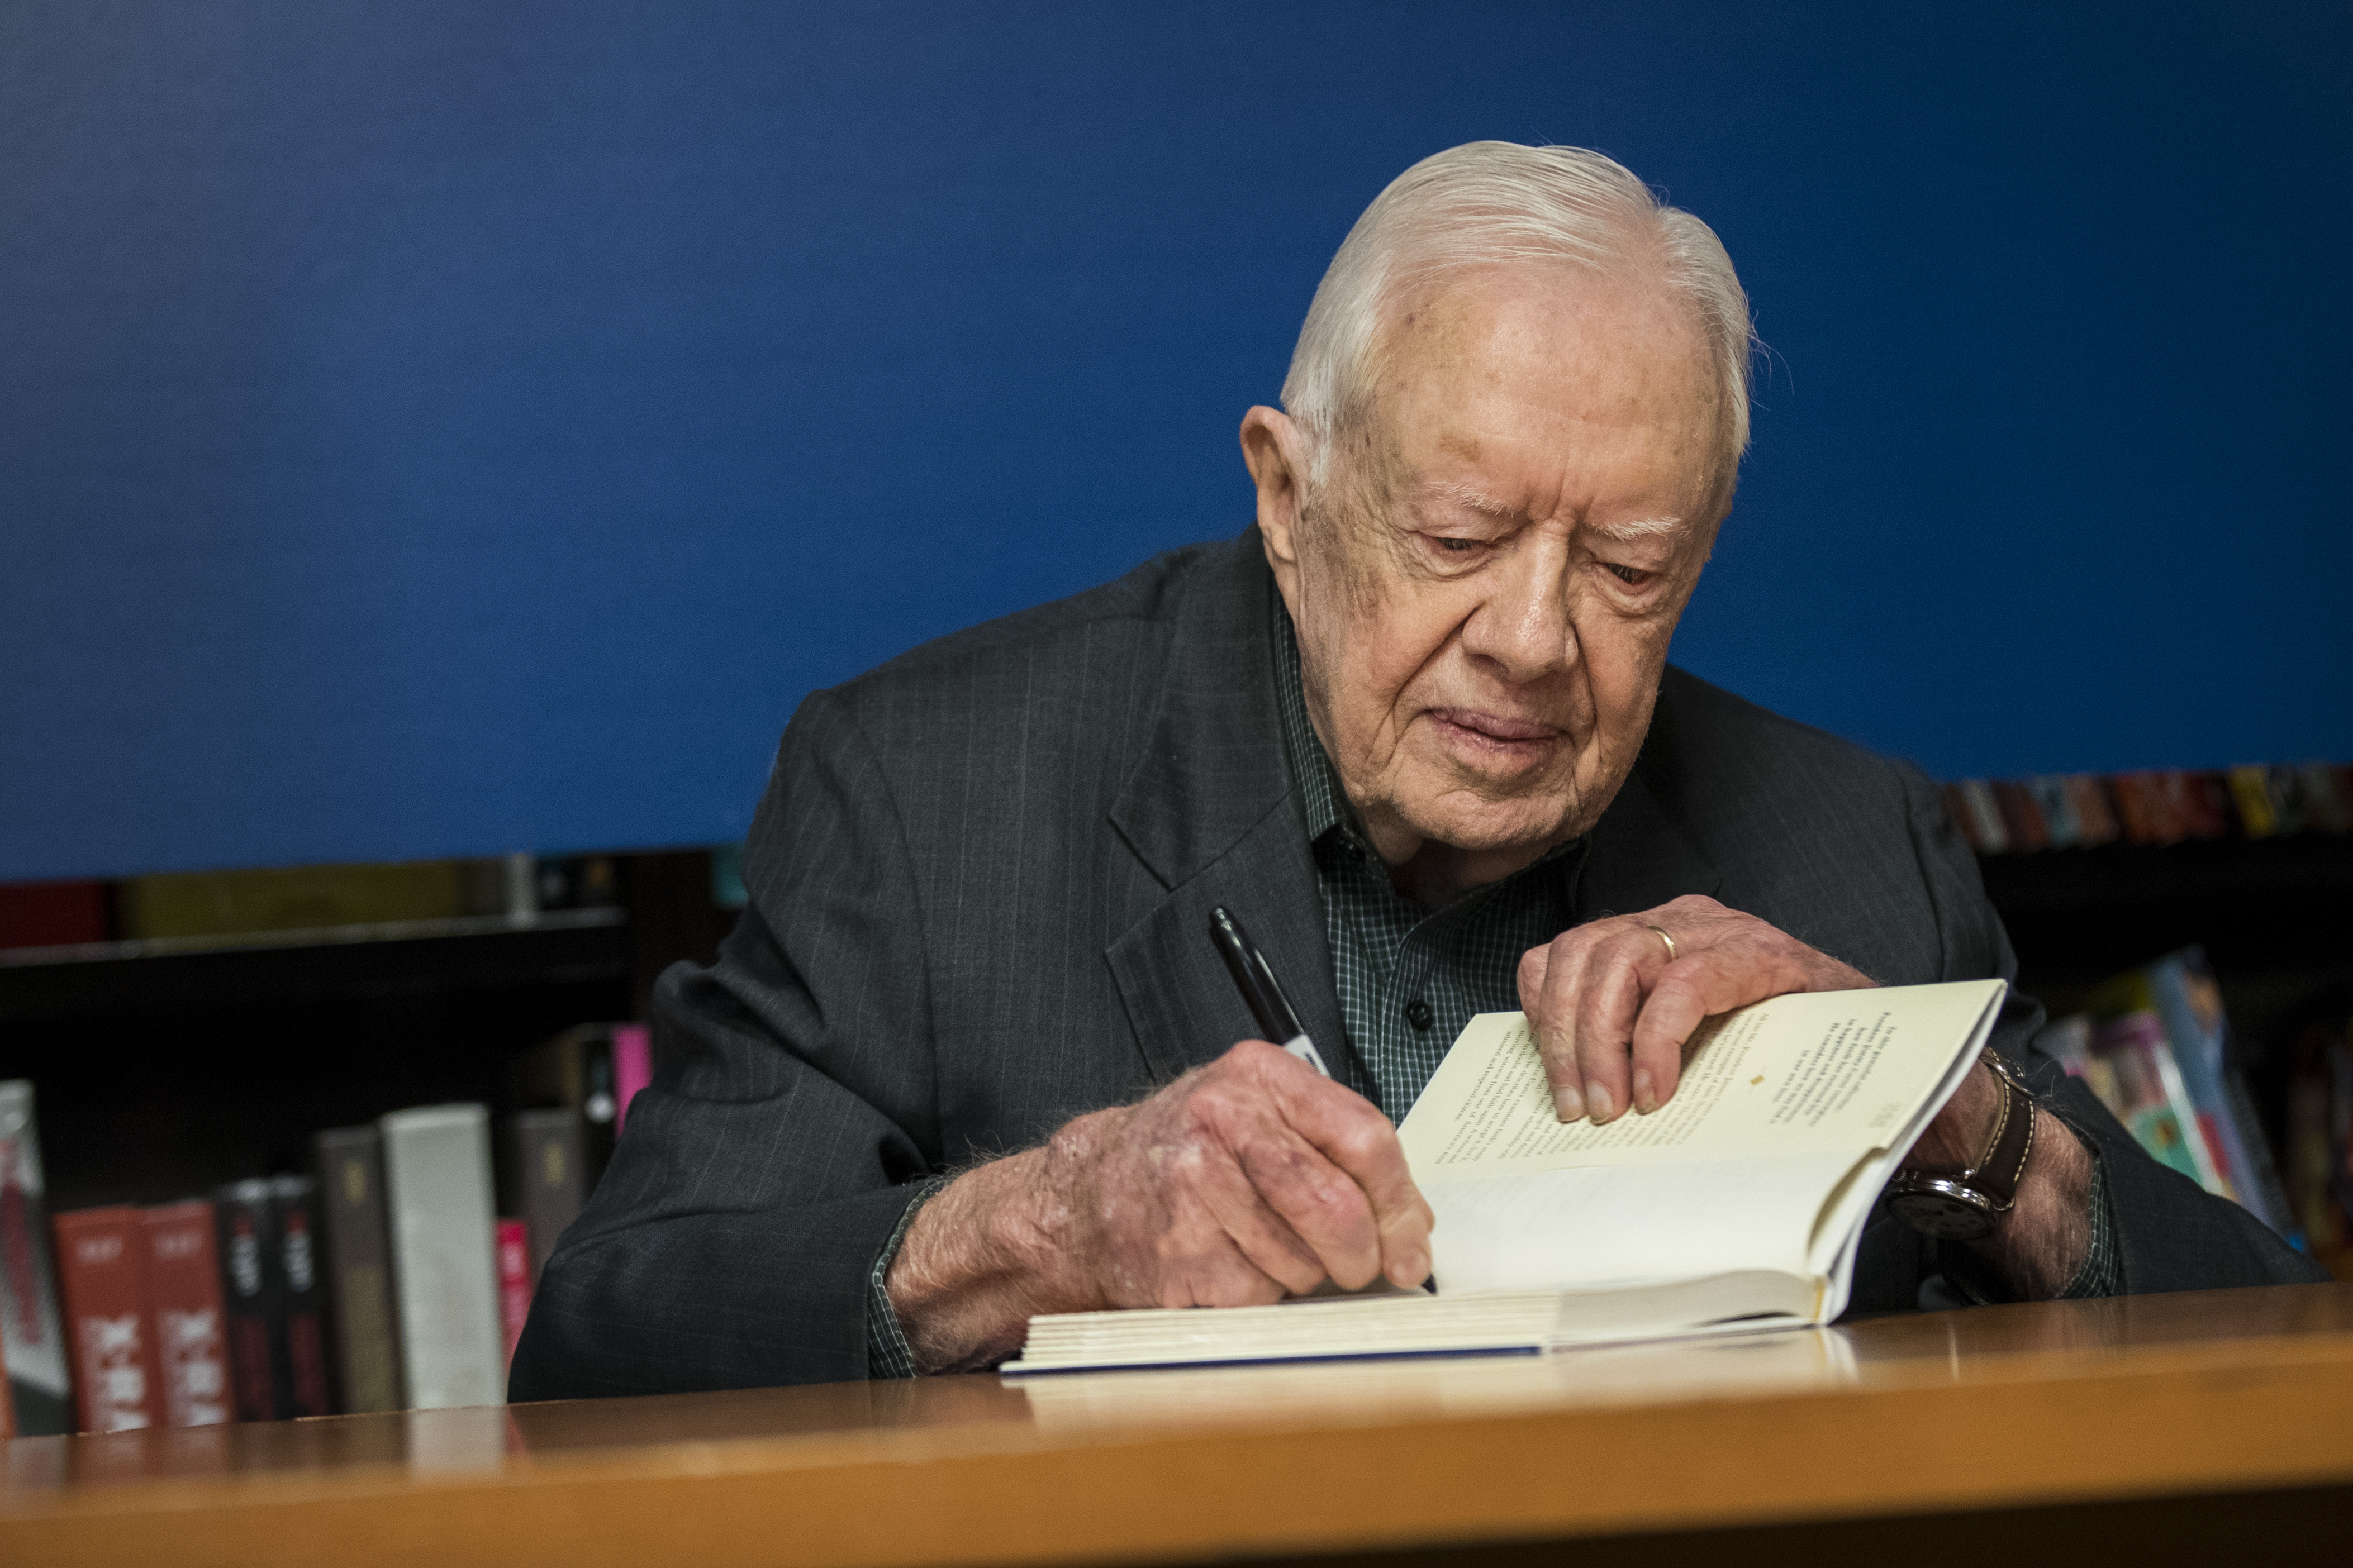 Jimmy Carter signs a copy of his new book “Faith: A Journey For All” at a book signing event at Barnes & Noble bookstore in Midtown Manhattan, New York City, on March 26, 2018. | Source: Getty Images